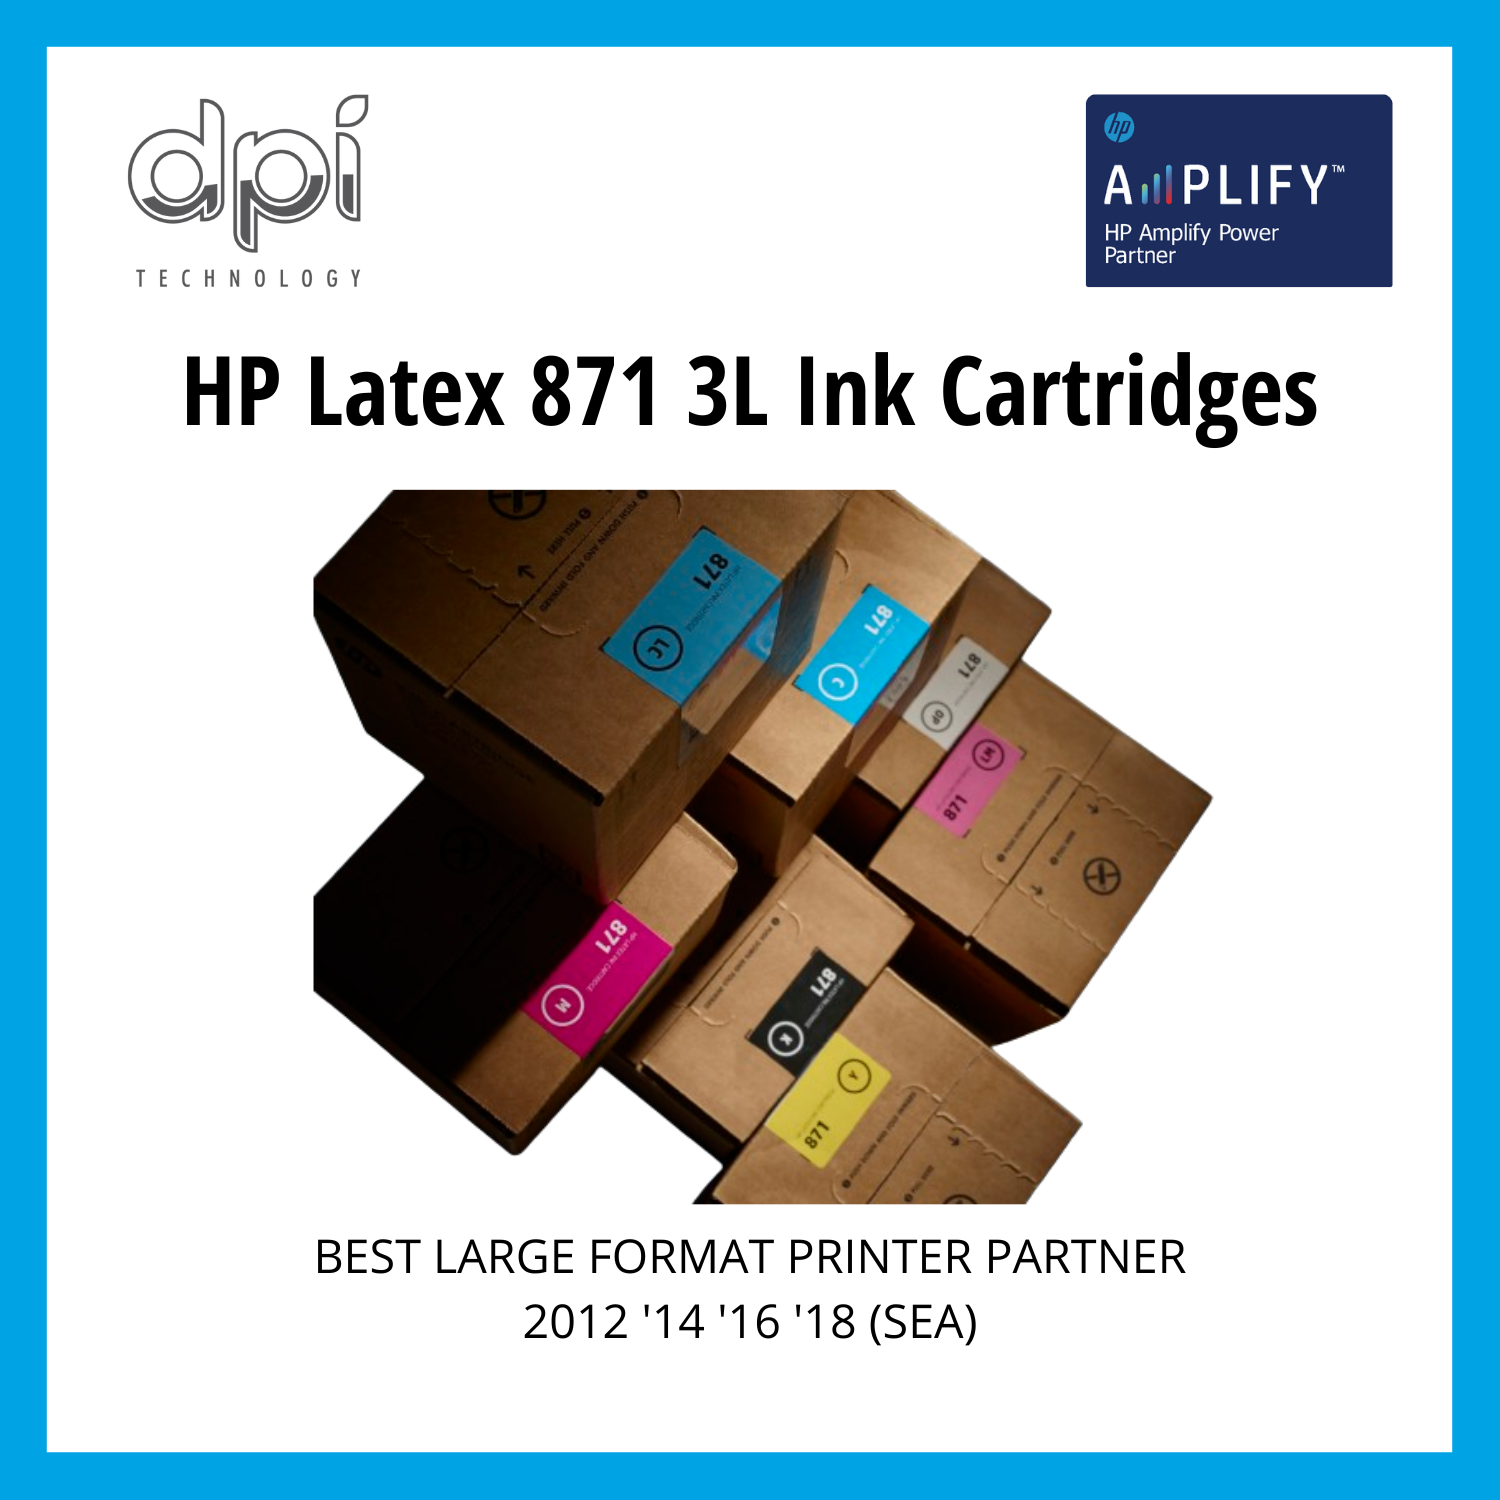 HP Latex 871 Ink Consumables